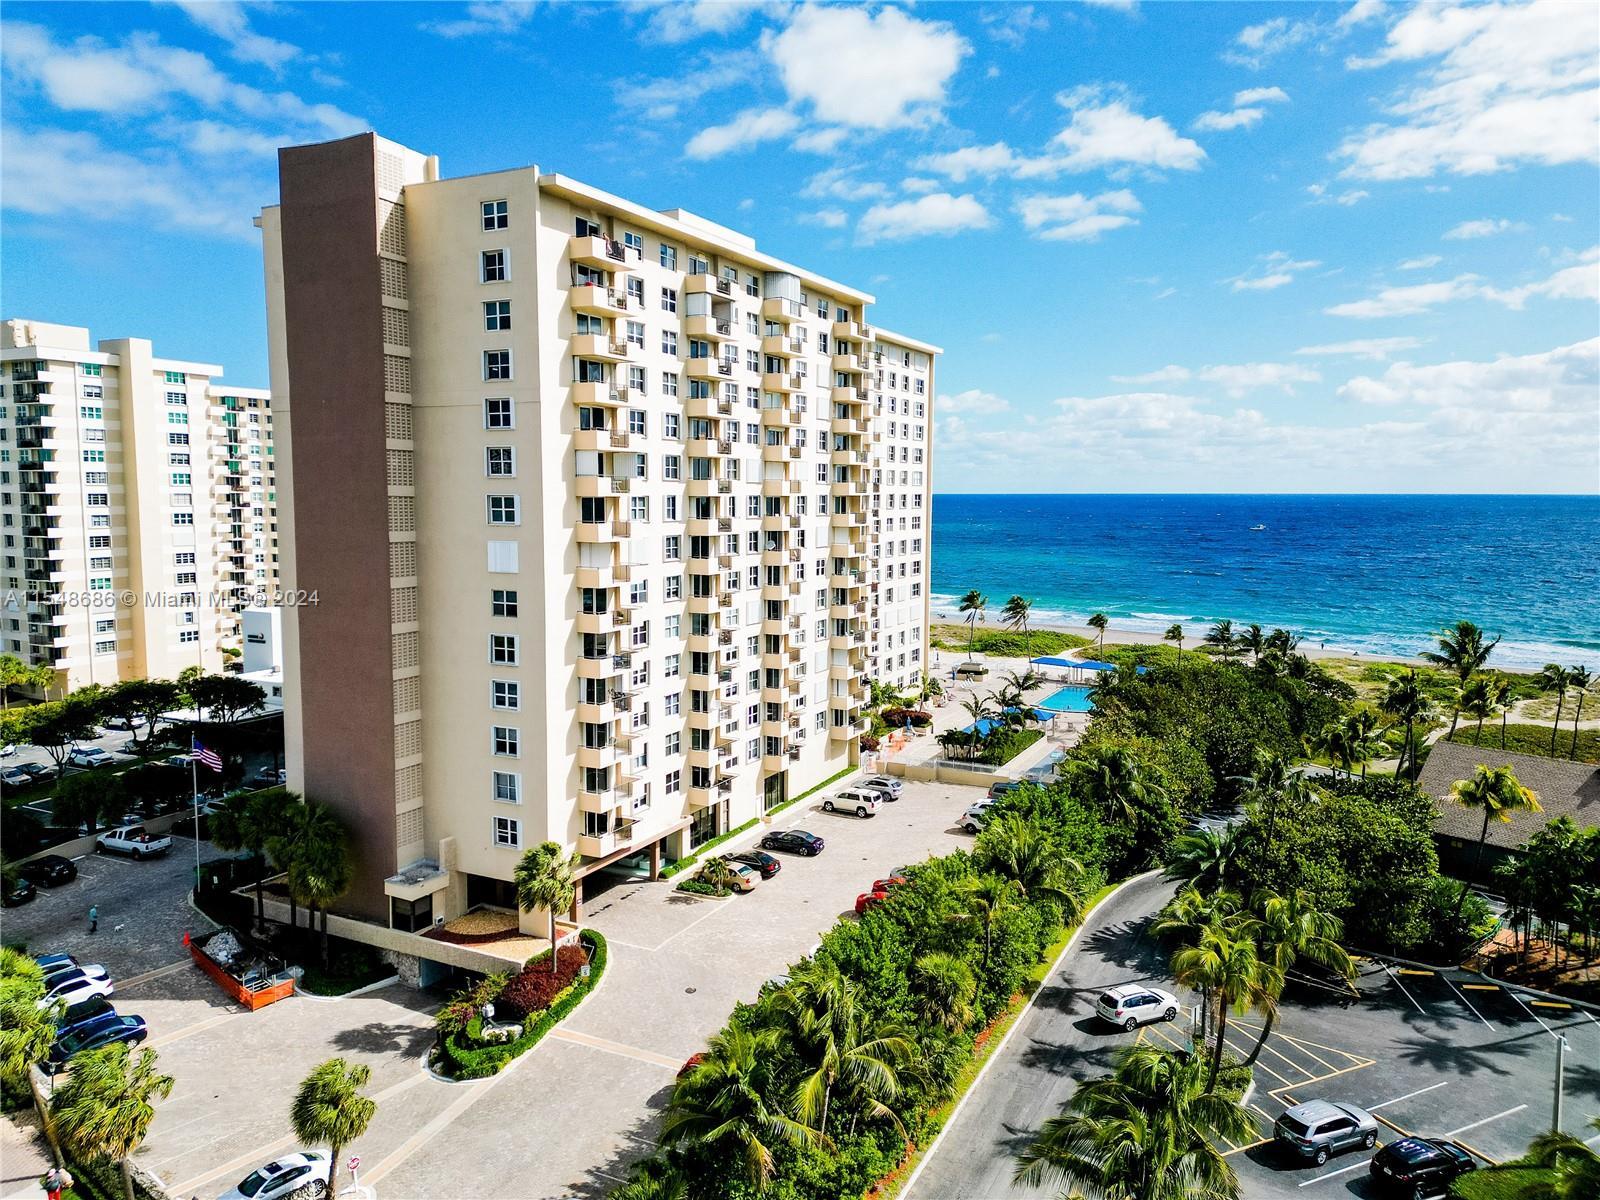 Photo of 2000 S Ocean Blvd #16C in Lauderdale By The Sea, FL